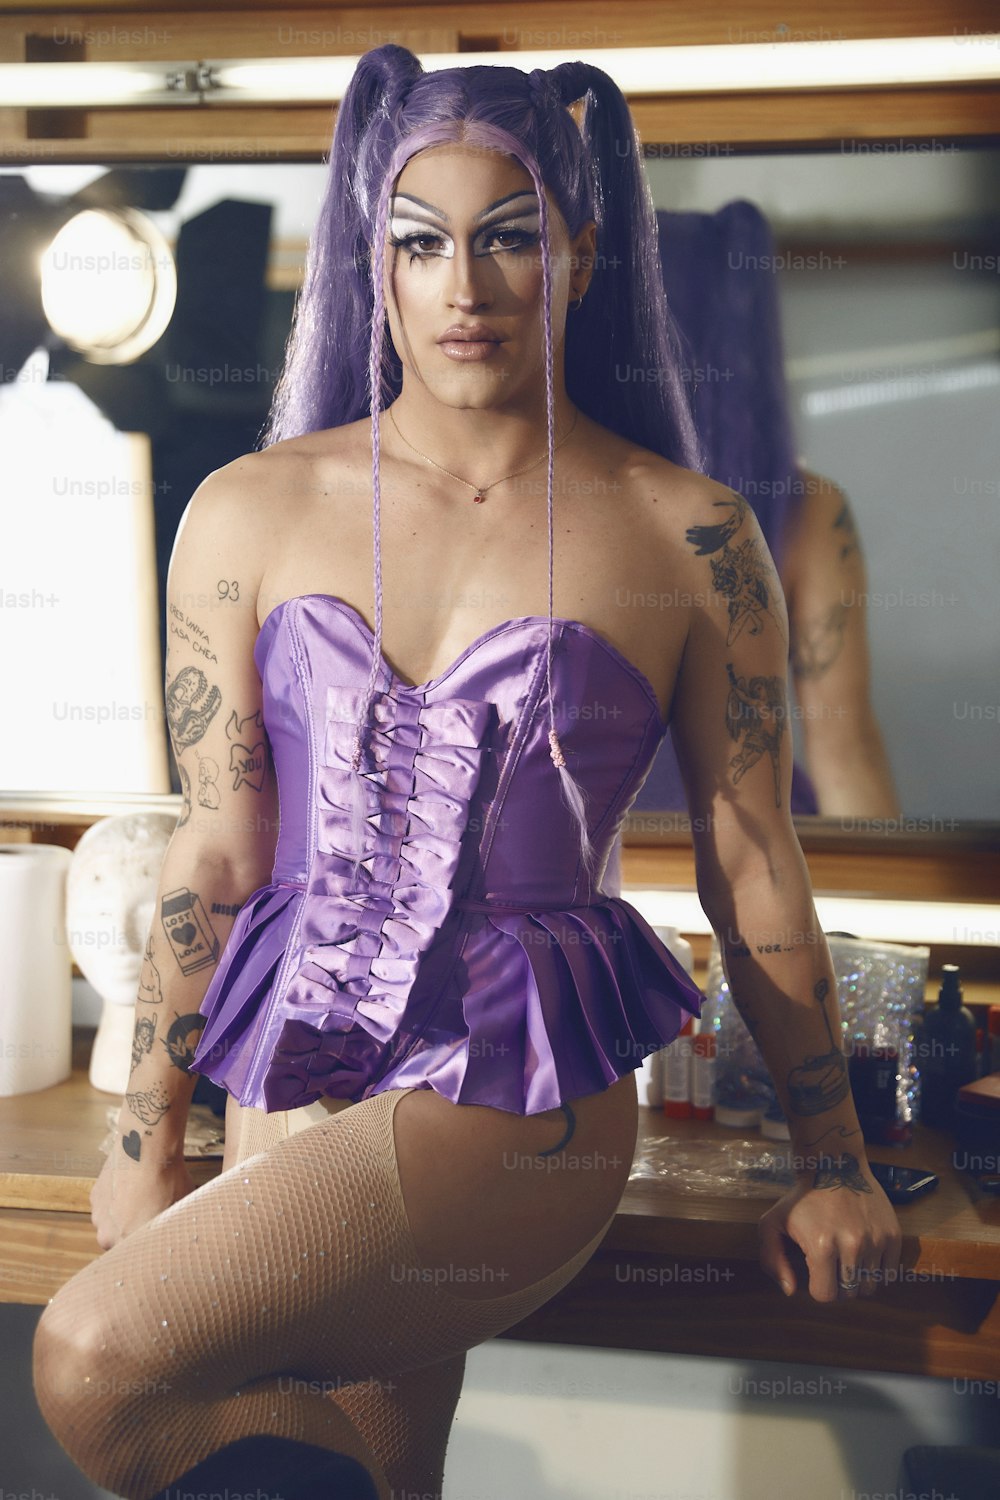 a woman in a purple corset sitting on a counter